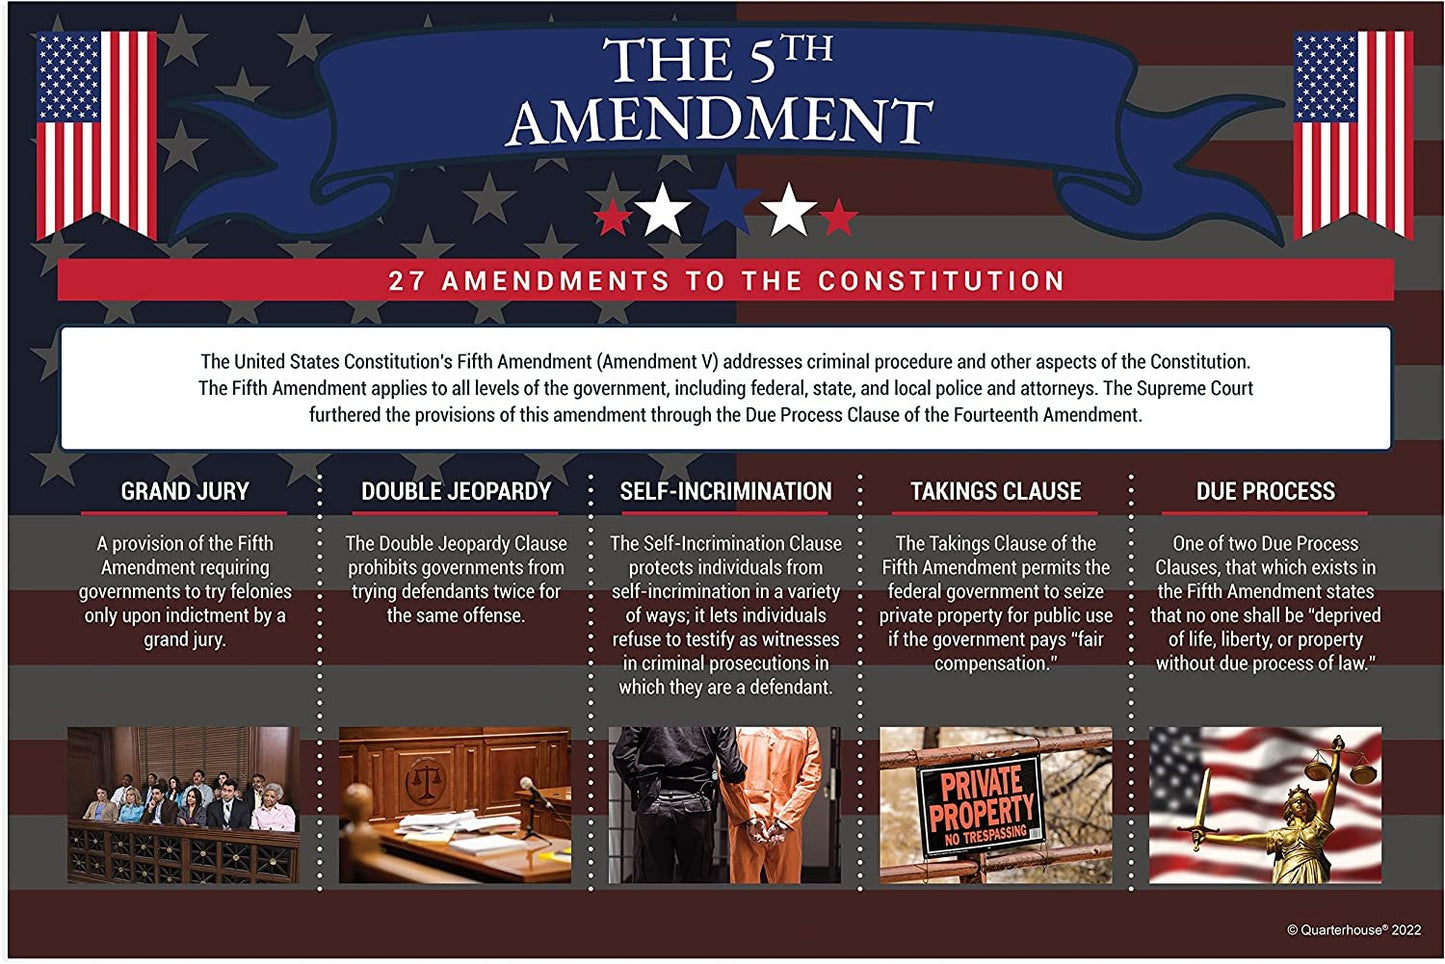 Quarterhouse 27 Amendments to the US Constitution (Bill of Rights Included) Poster Set, Social Studies Classroom Learning Materials for K-12 Students and Teachers, Set of 8, 12 x 18 Inches, Extra Durable